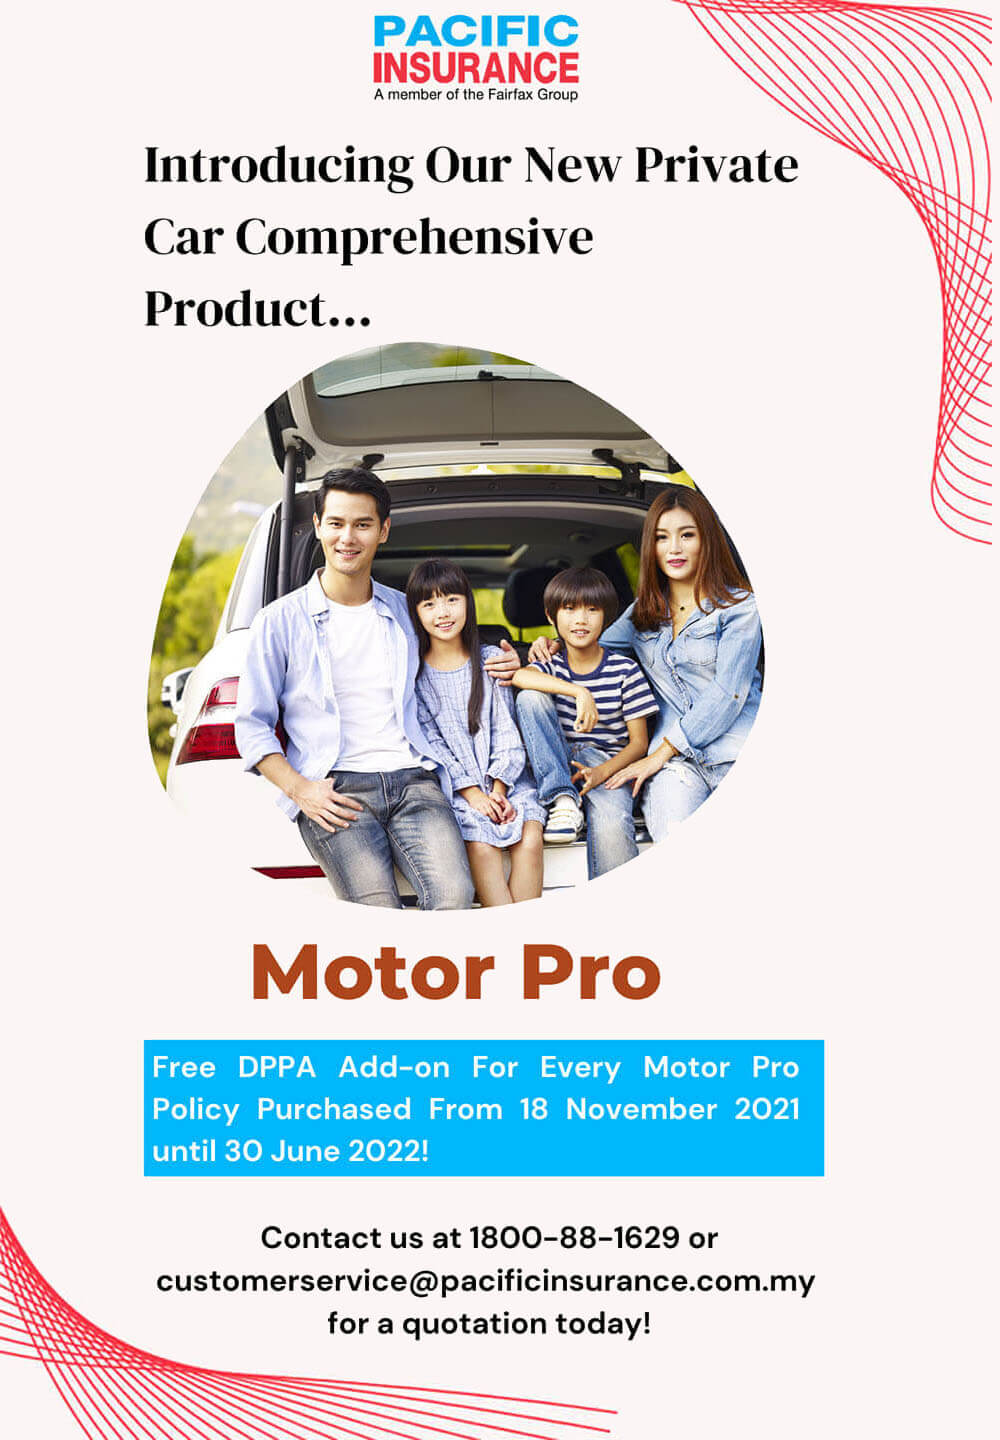 Introducing Our New Private Car Comprehensive Product – Motor Pro